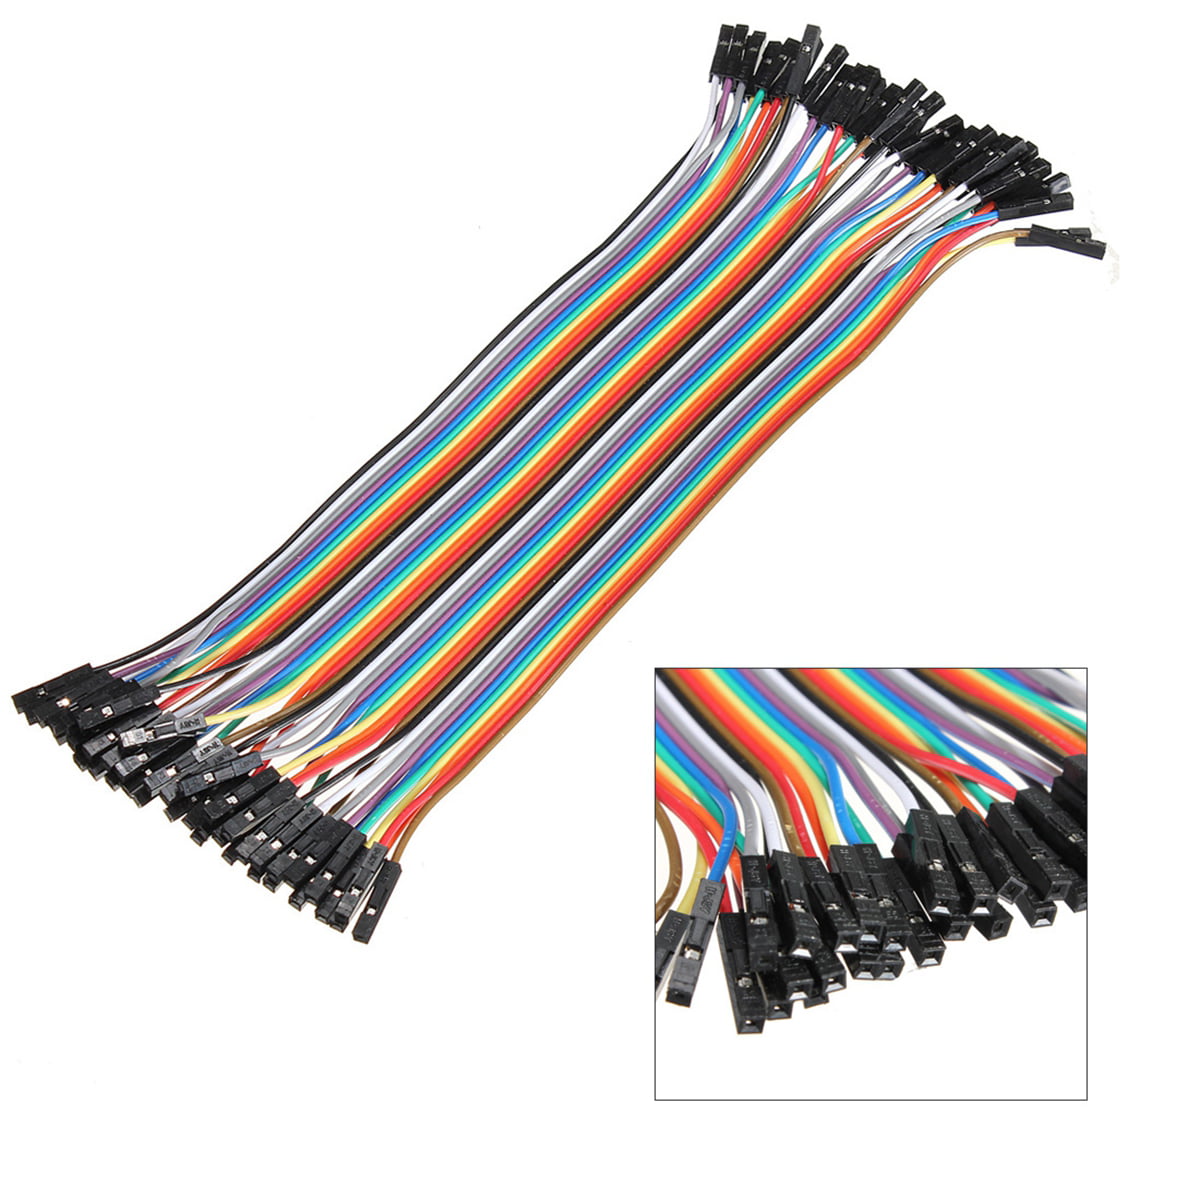 40pcs 20cm 2.54mm female to female Breadboard jumper wire cable for Arduino 